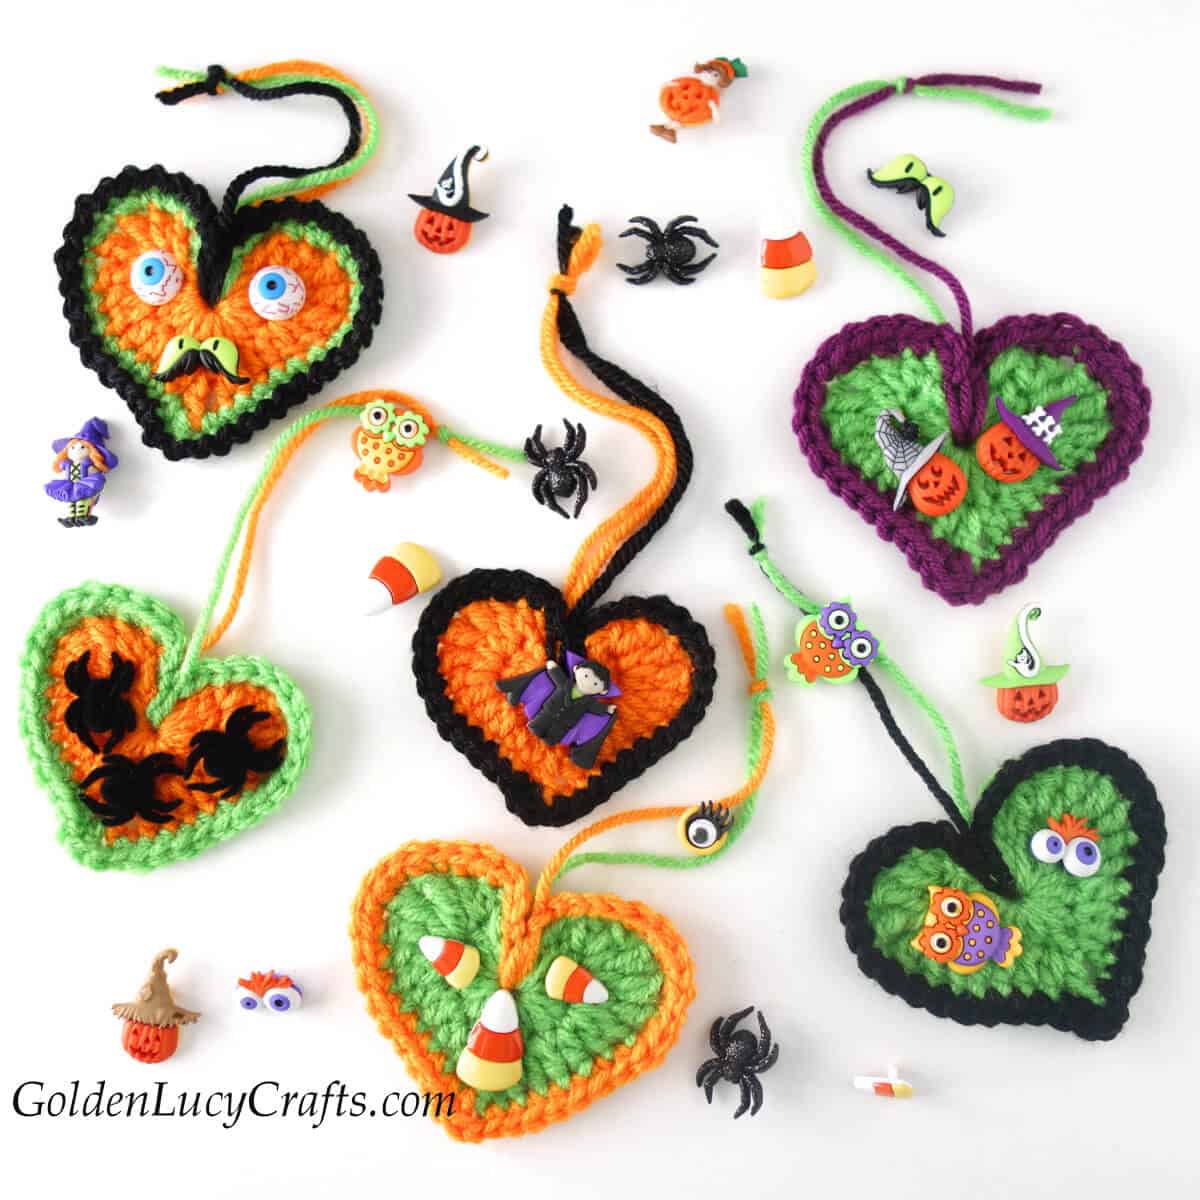 Crocheted Halloween heart ornaments embellished with Halloween themed buttons.